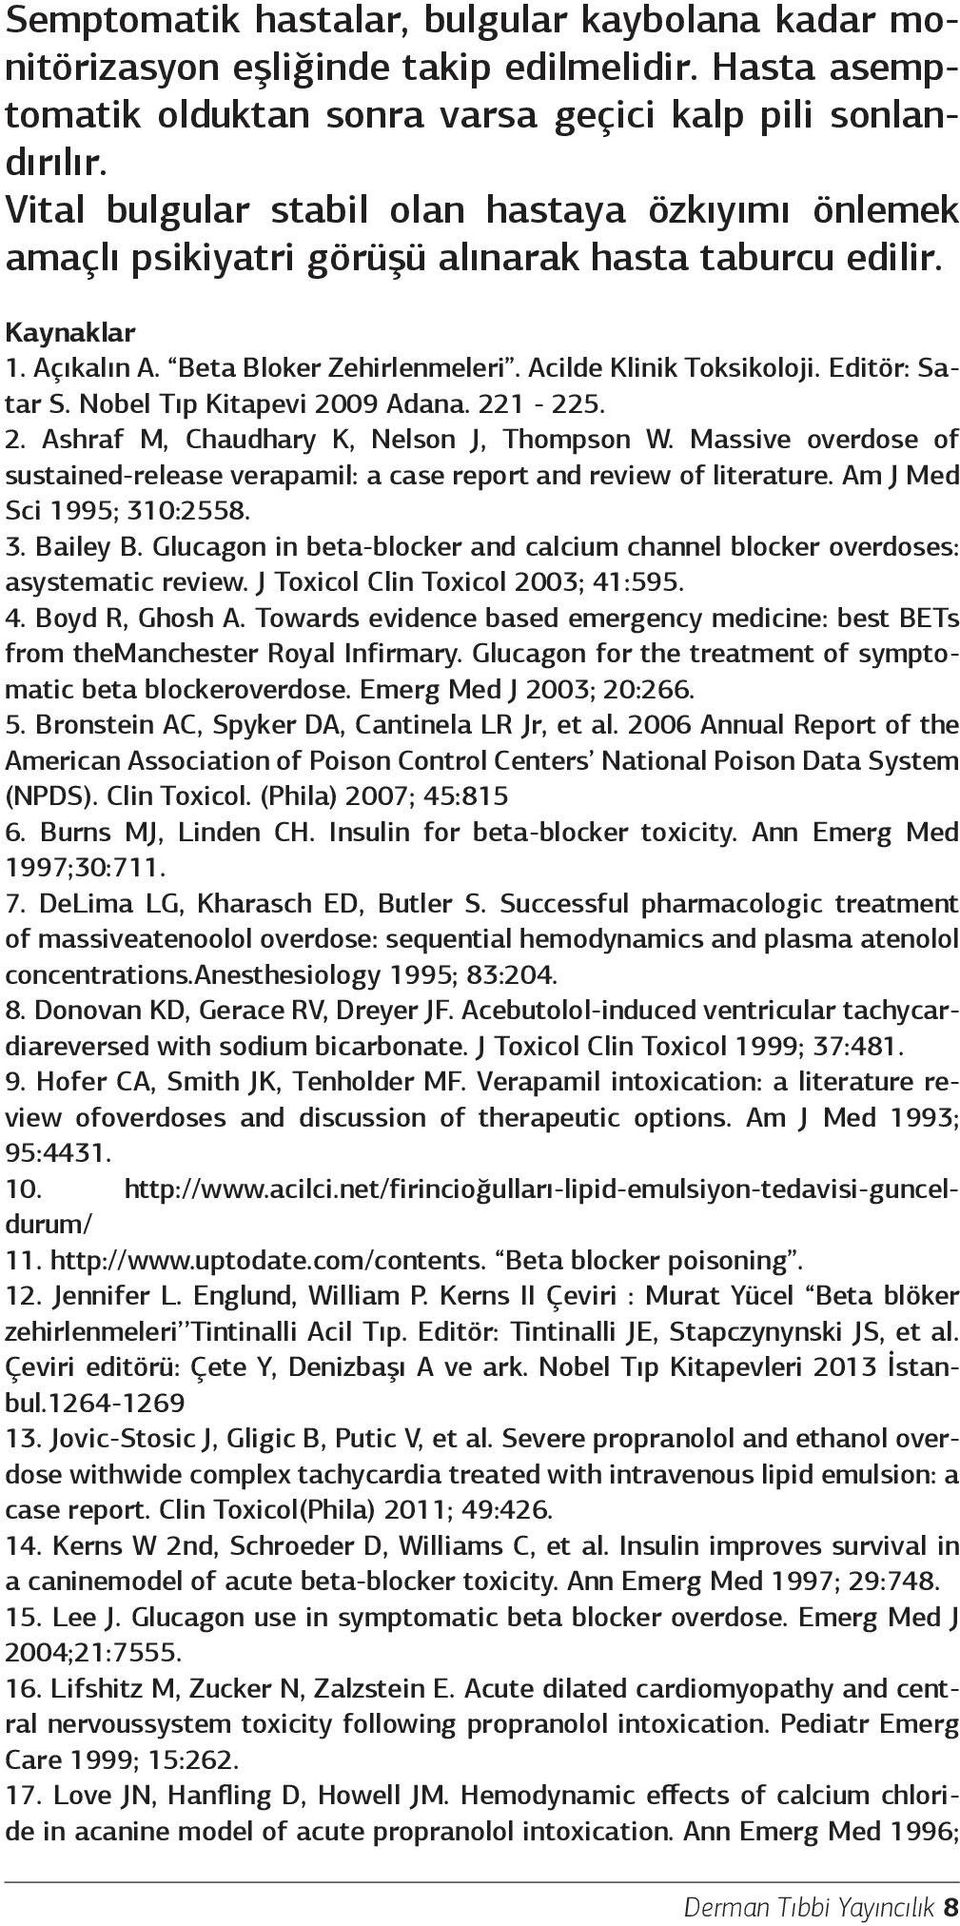 Editör: Satar S. Nobel Tıp Kitapevi 2009 Adana. 221-225. 2. Ashraf M, Chaudhary K, Nelson J, Thompson W. Massive overdose of sustained-release verapamil: a case report and review of literature.